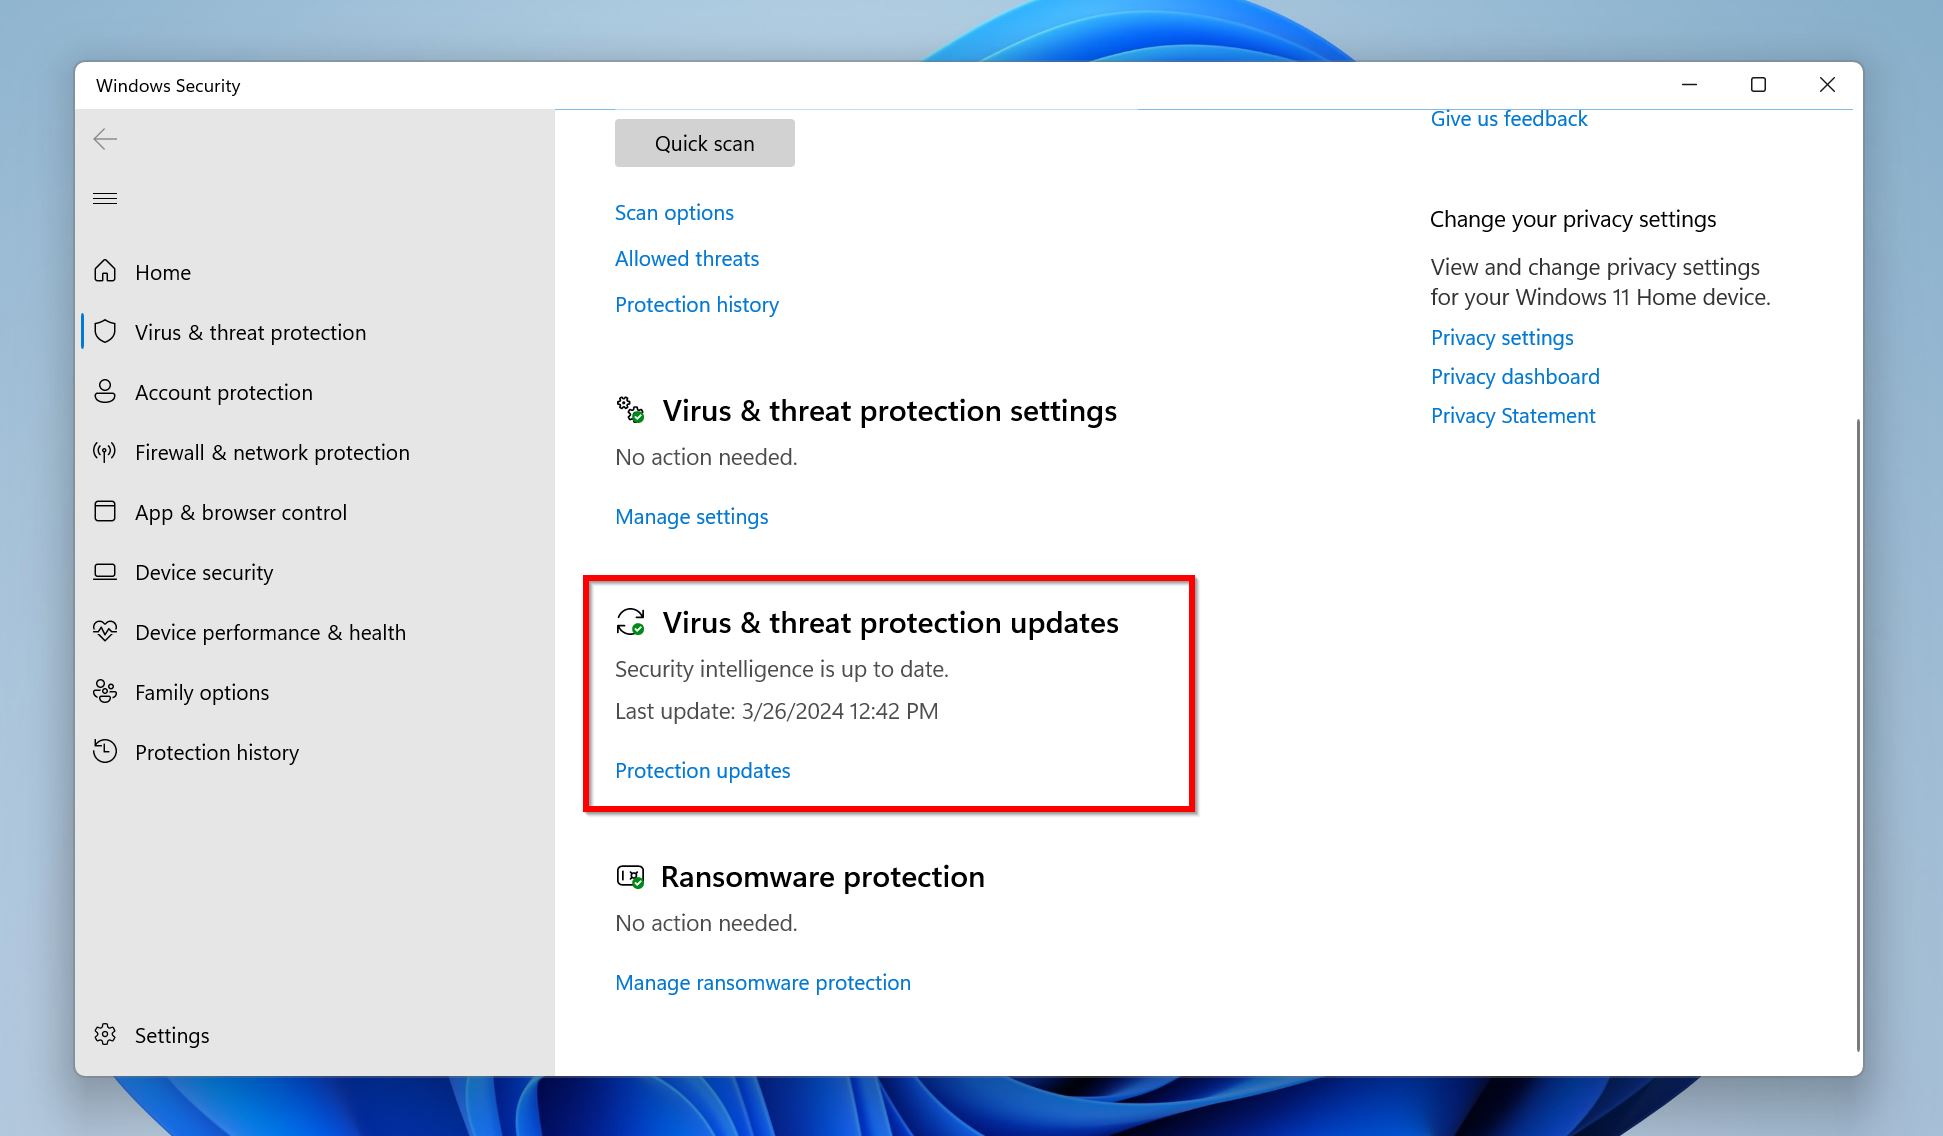 Windows Security window showing Virus & threat protection updates, indicating security intelligence is up to date.